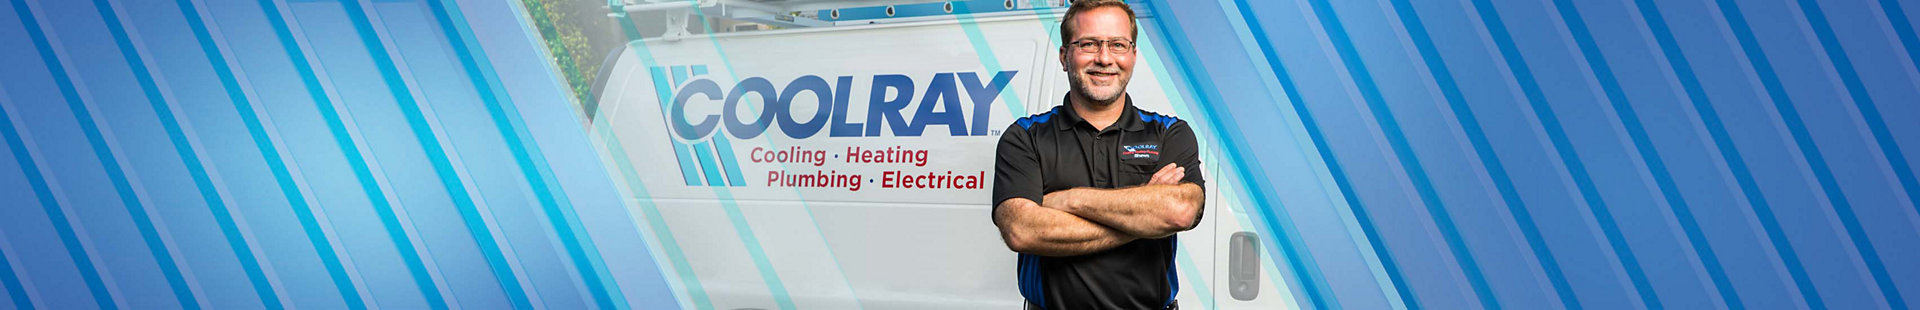 Heating technician and Coolray service vehicle